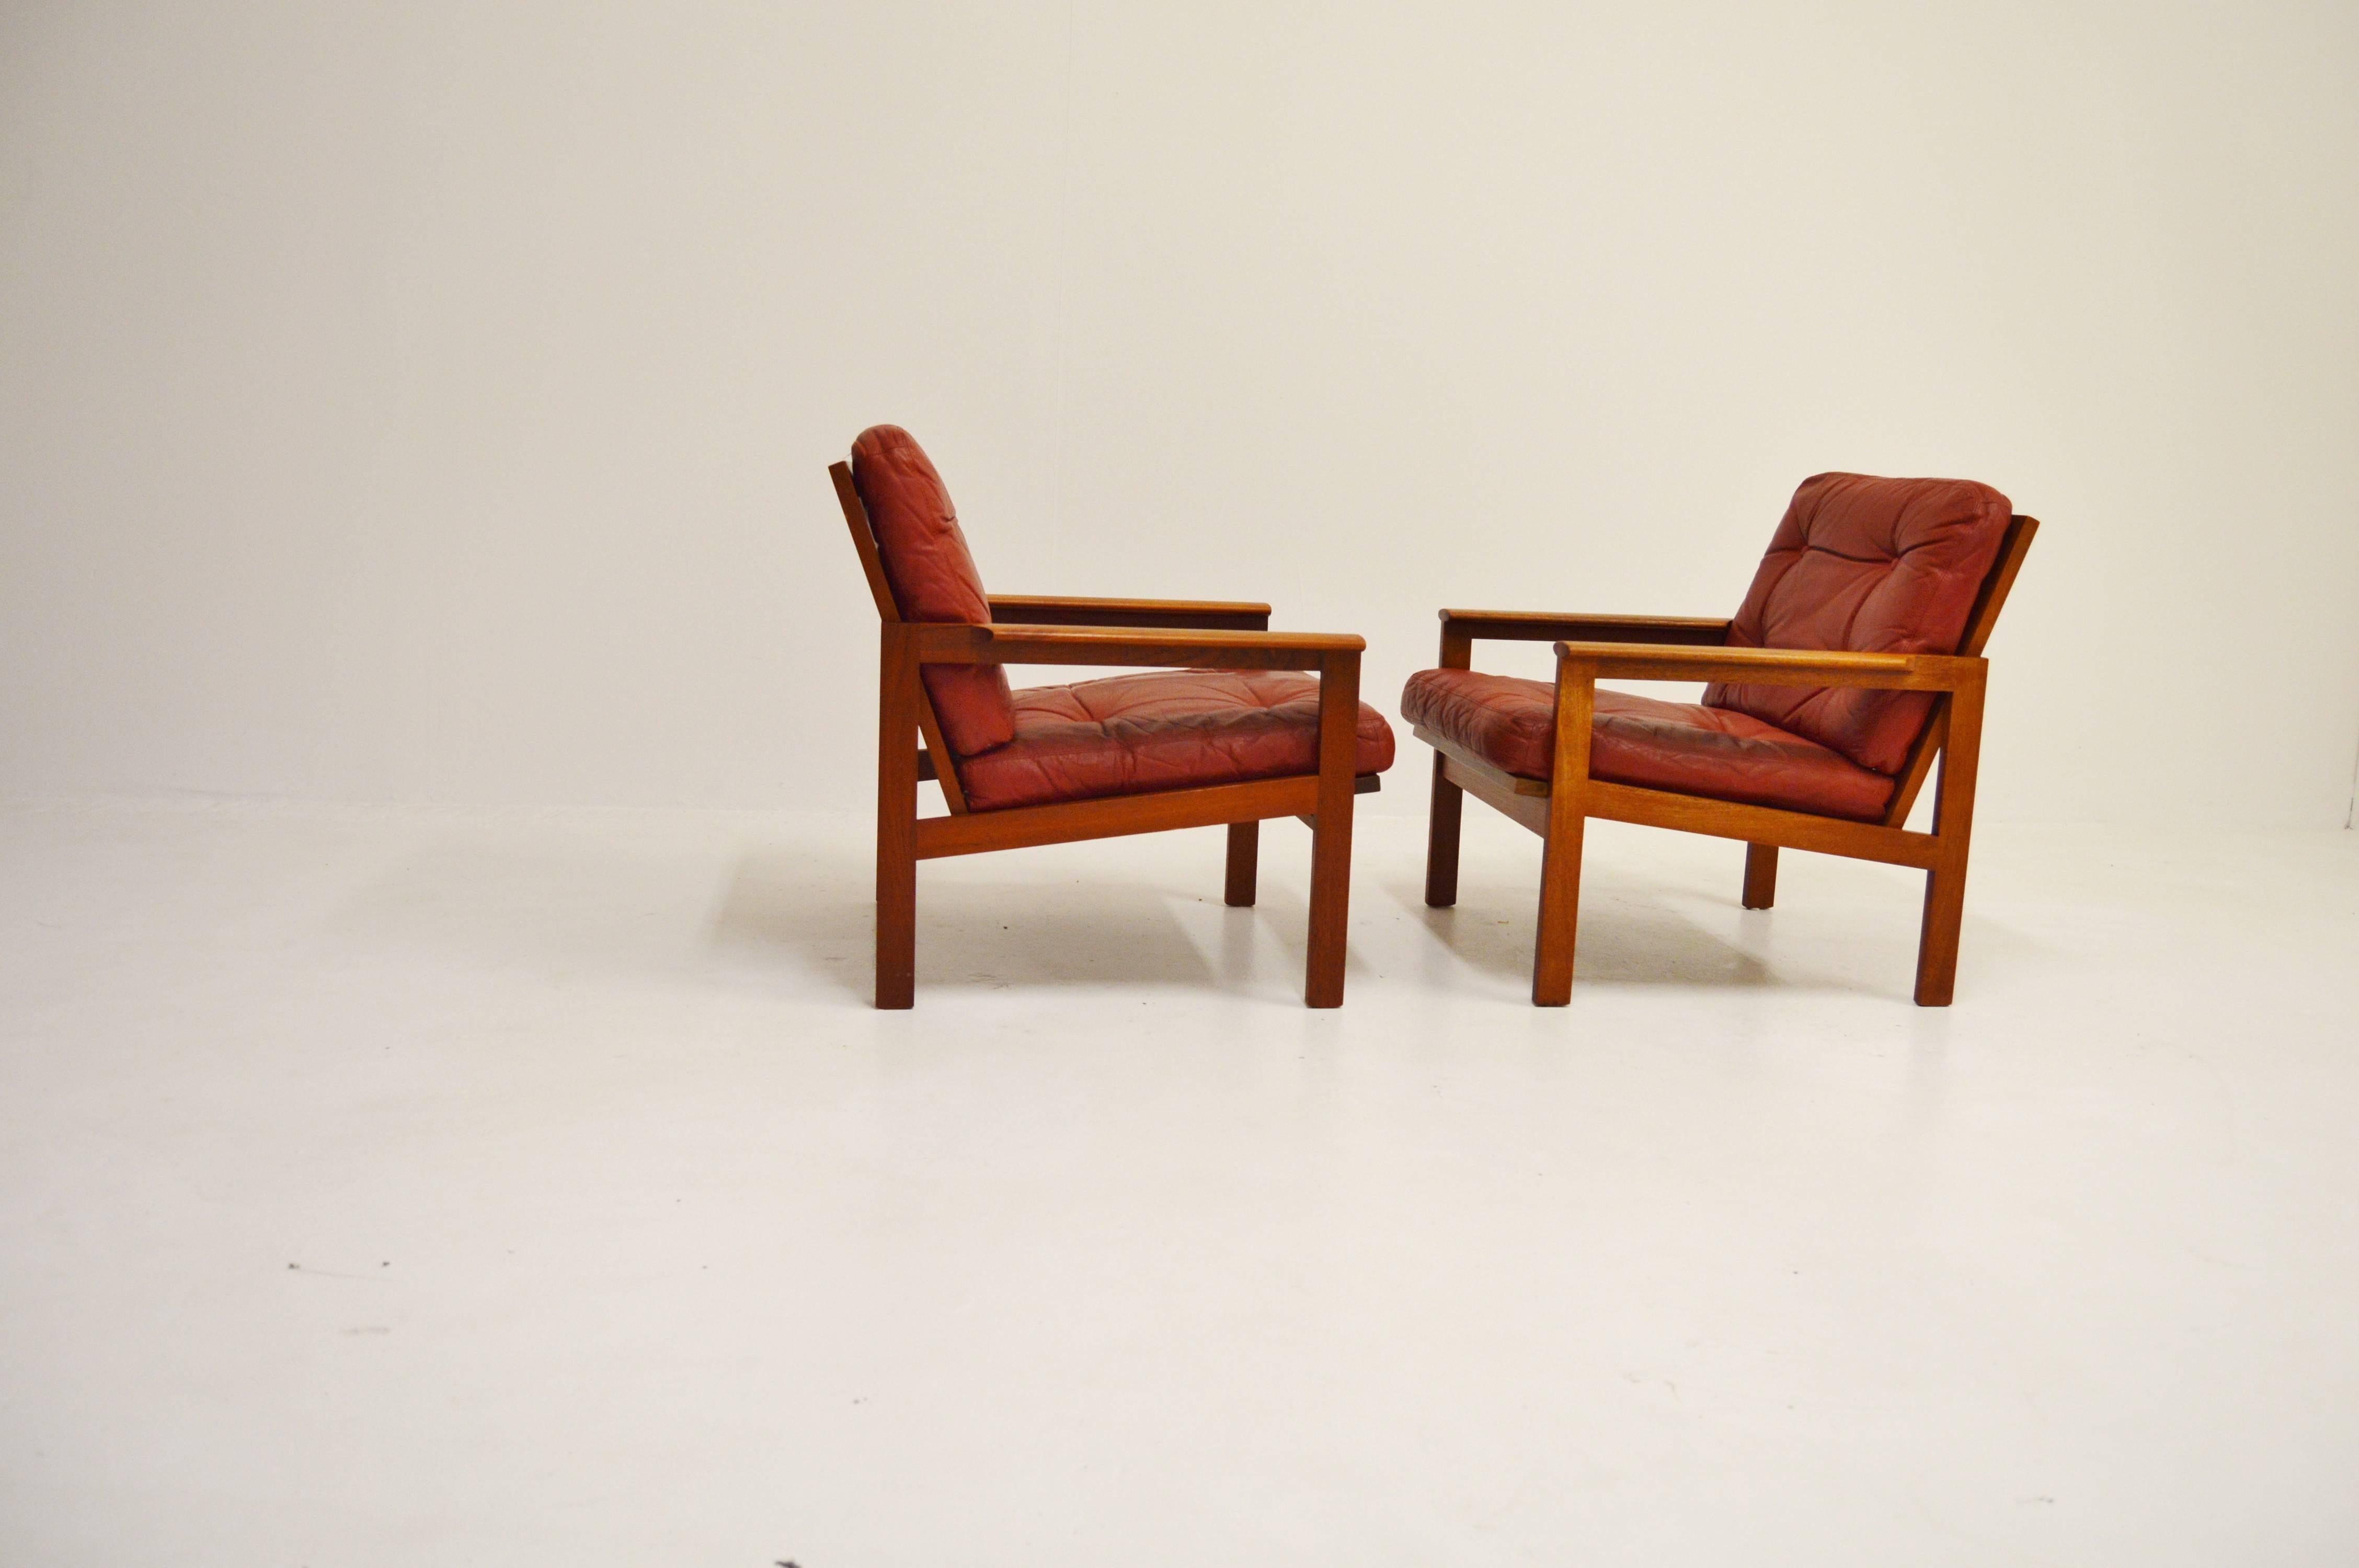 A pair of lounge chairs made of teak. Red leather coushions with deep-knotted buttons.
Designed by danish designer Illum Wikkelsö in the 1960s.